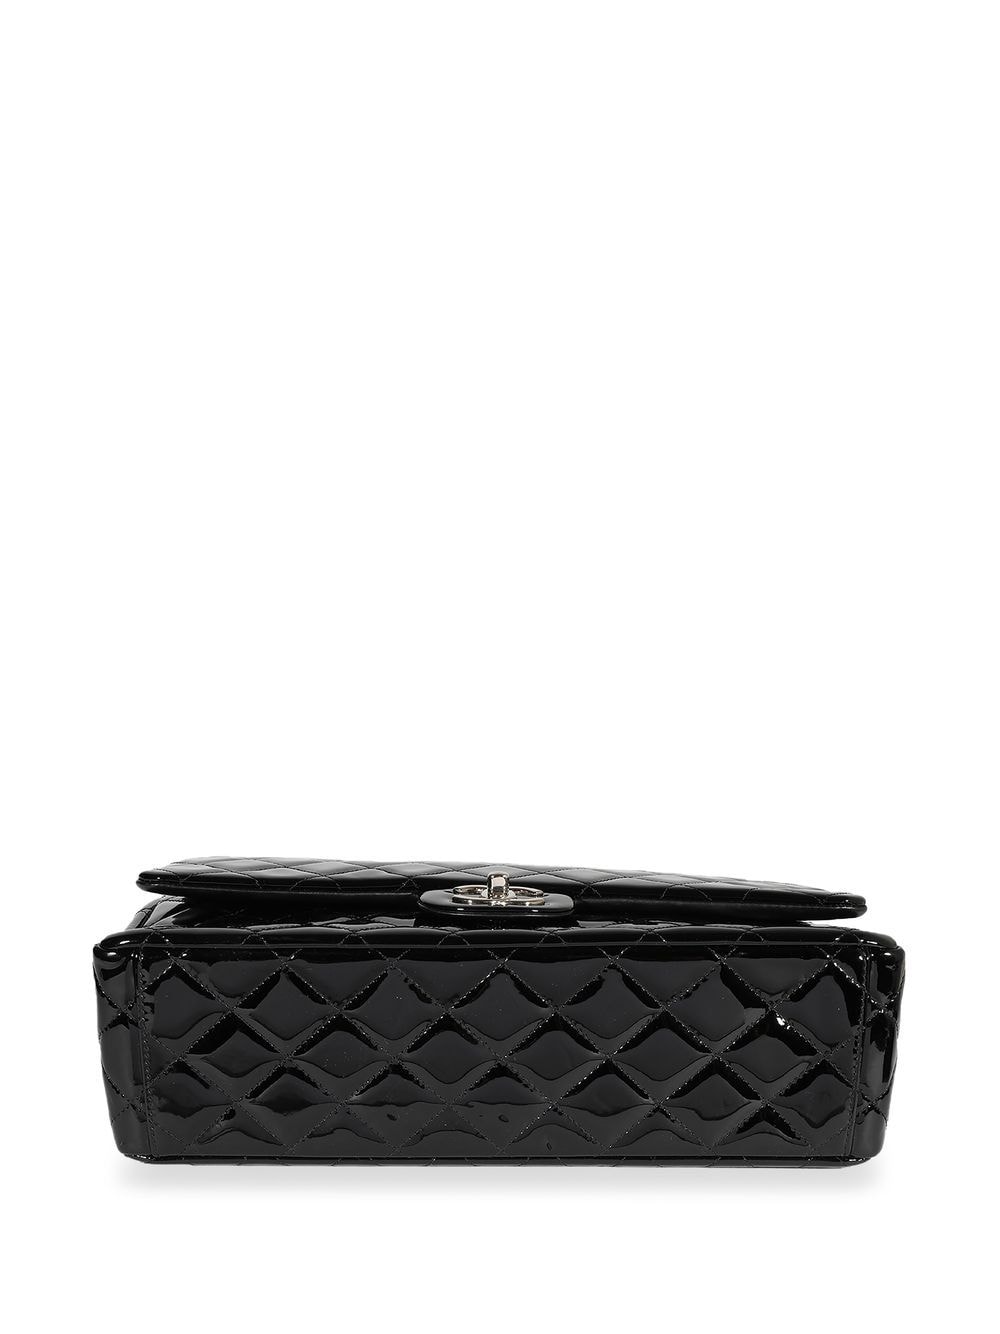 CHANEL Pre-Owned Maxi Double Flap Shoulder Bag - Farfetch